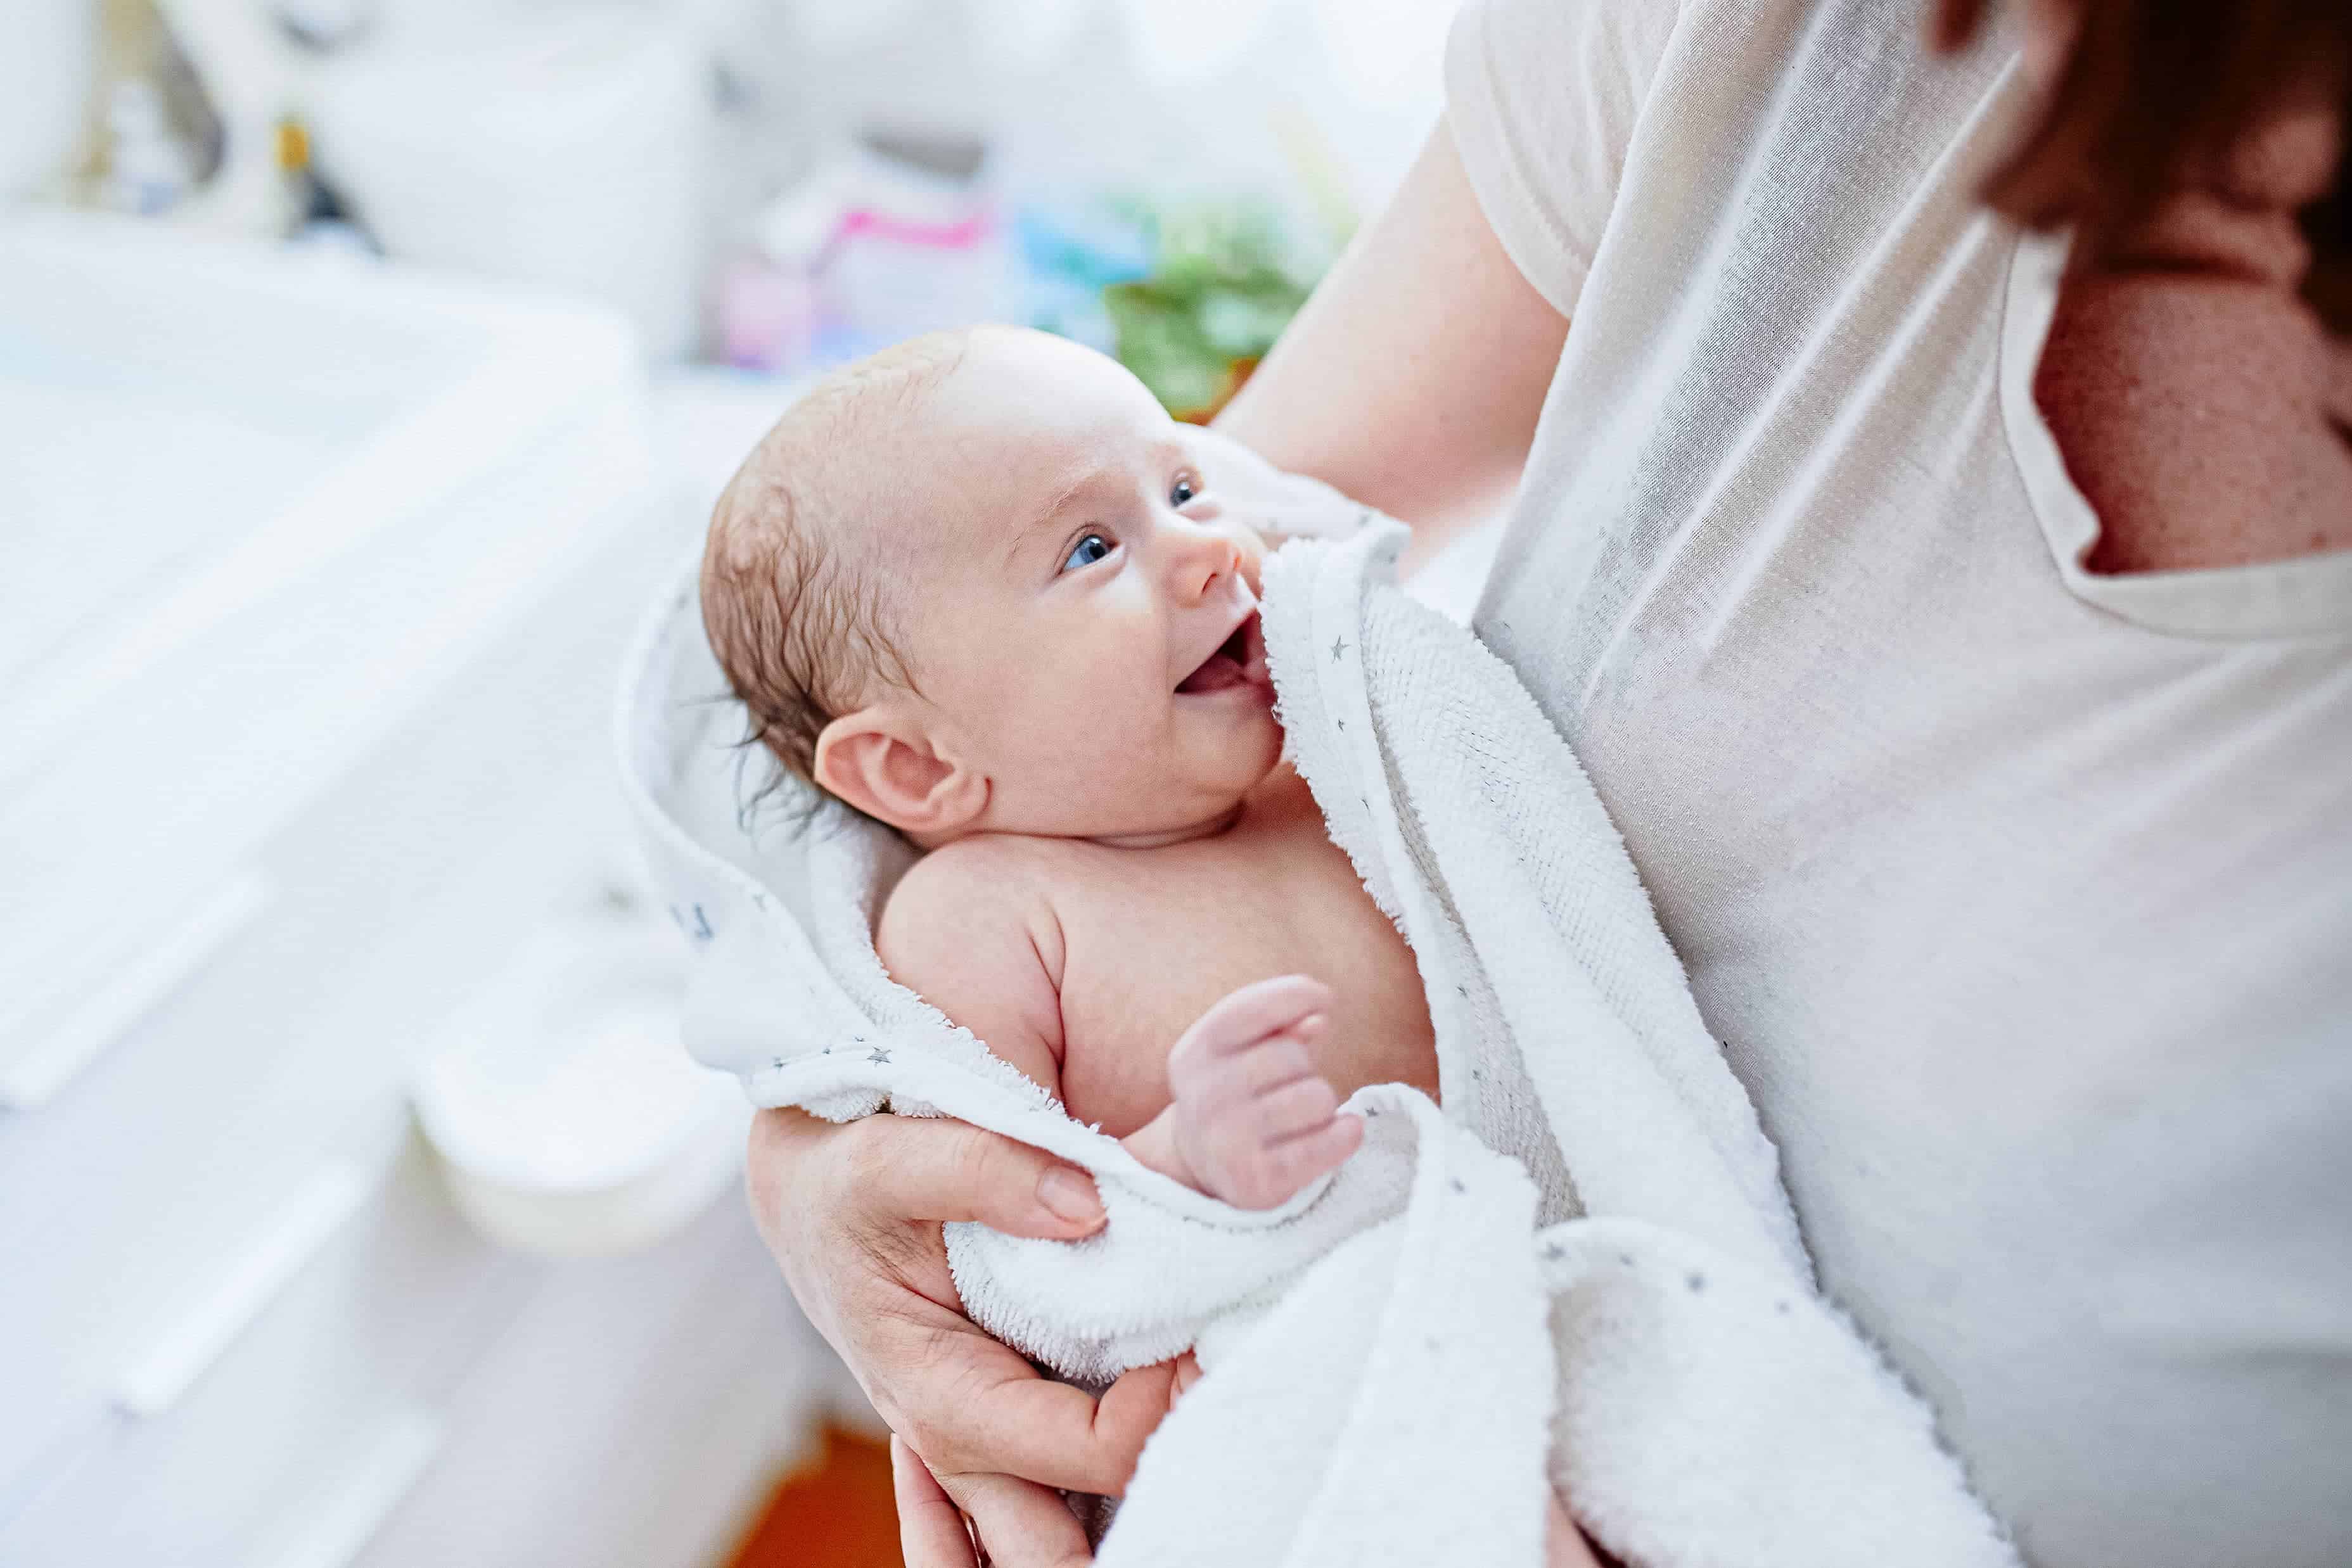 Detox Baths for Babies: How to Give 